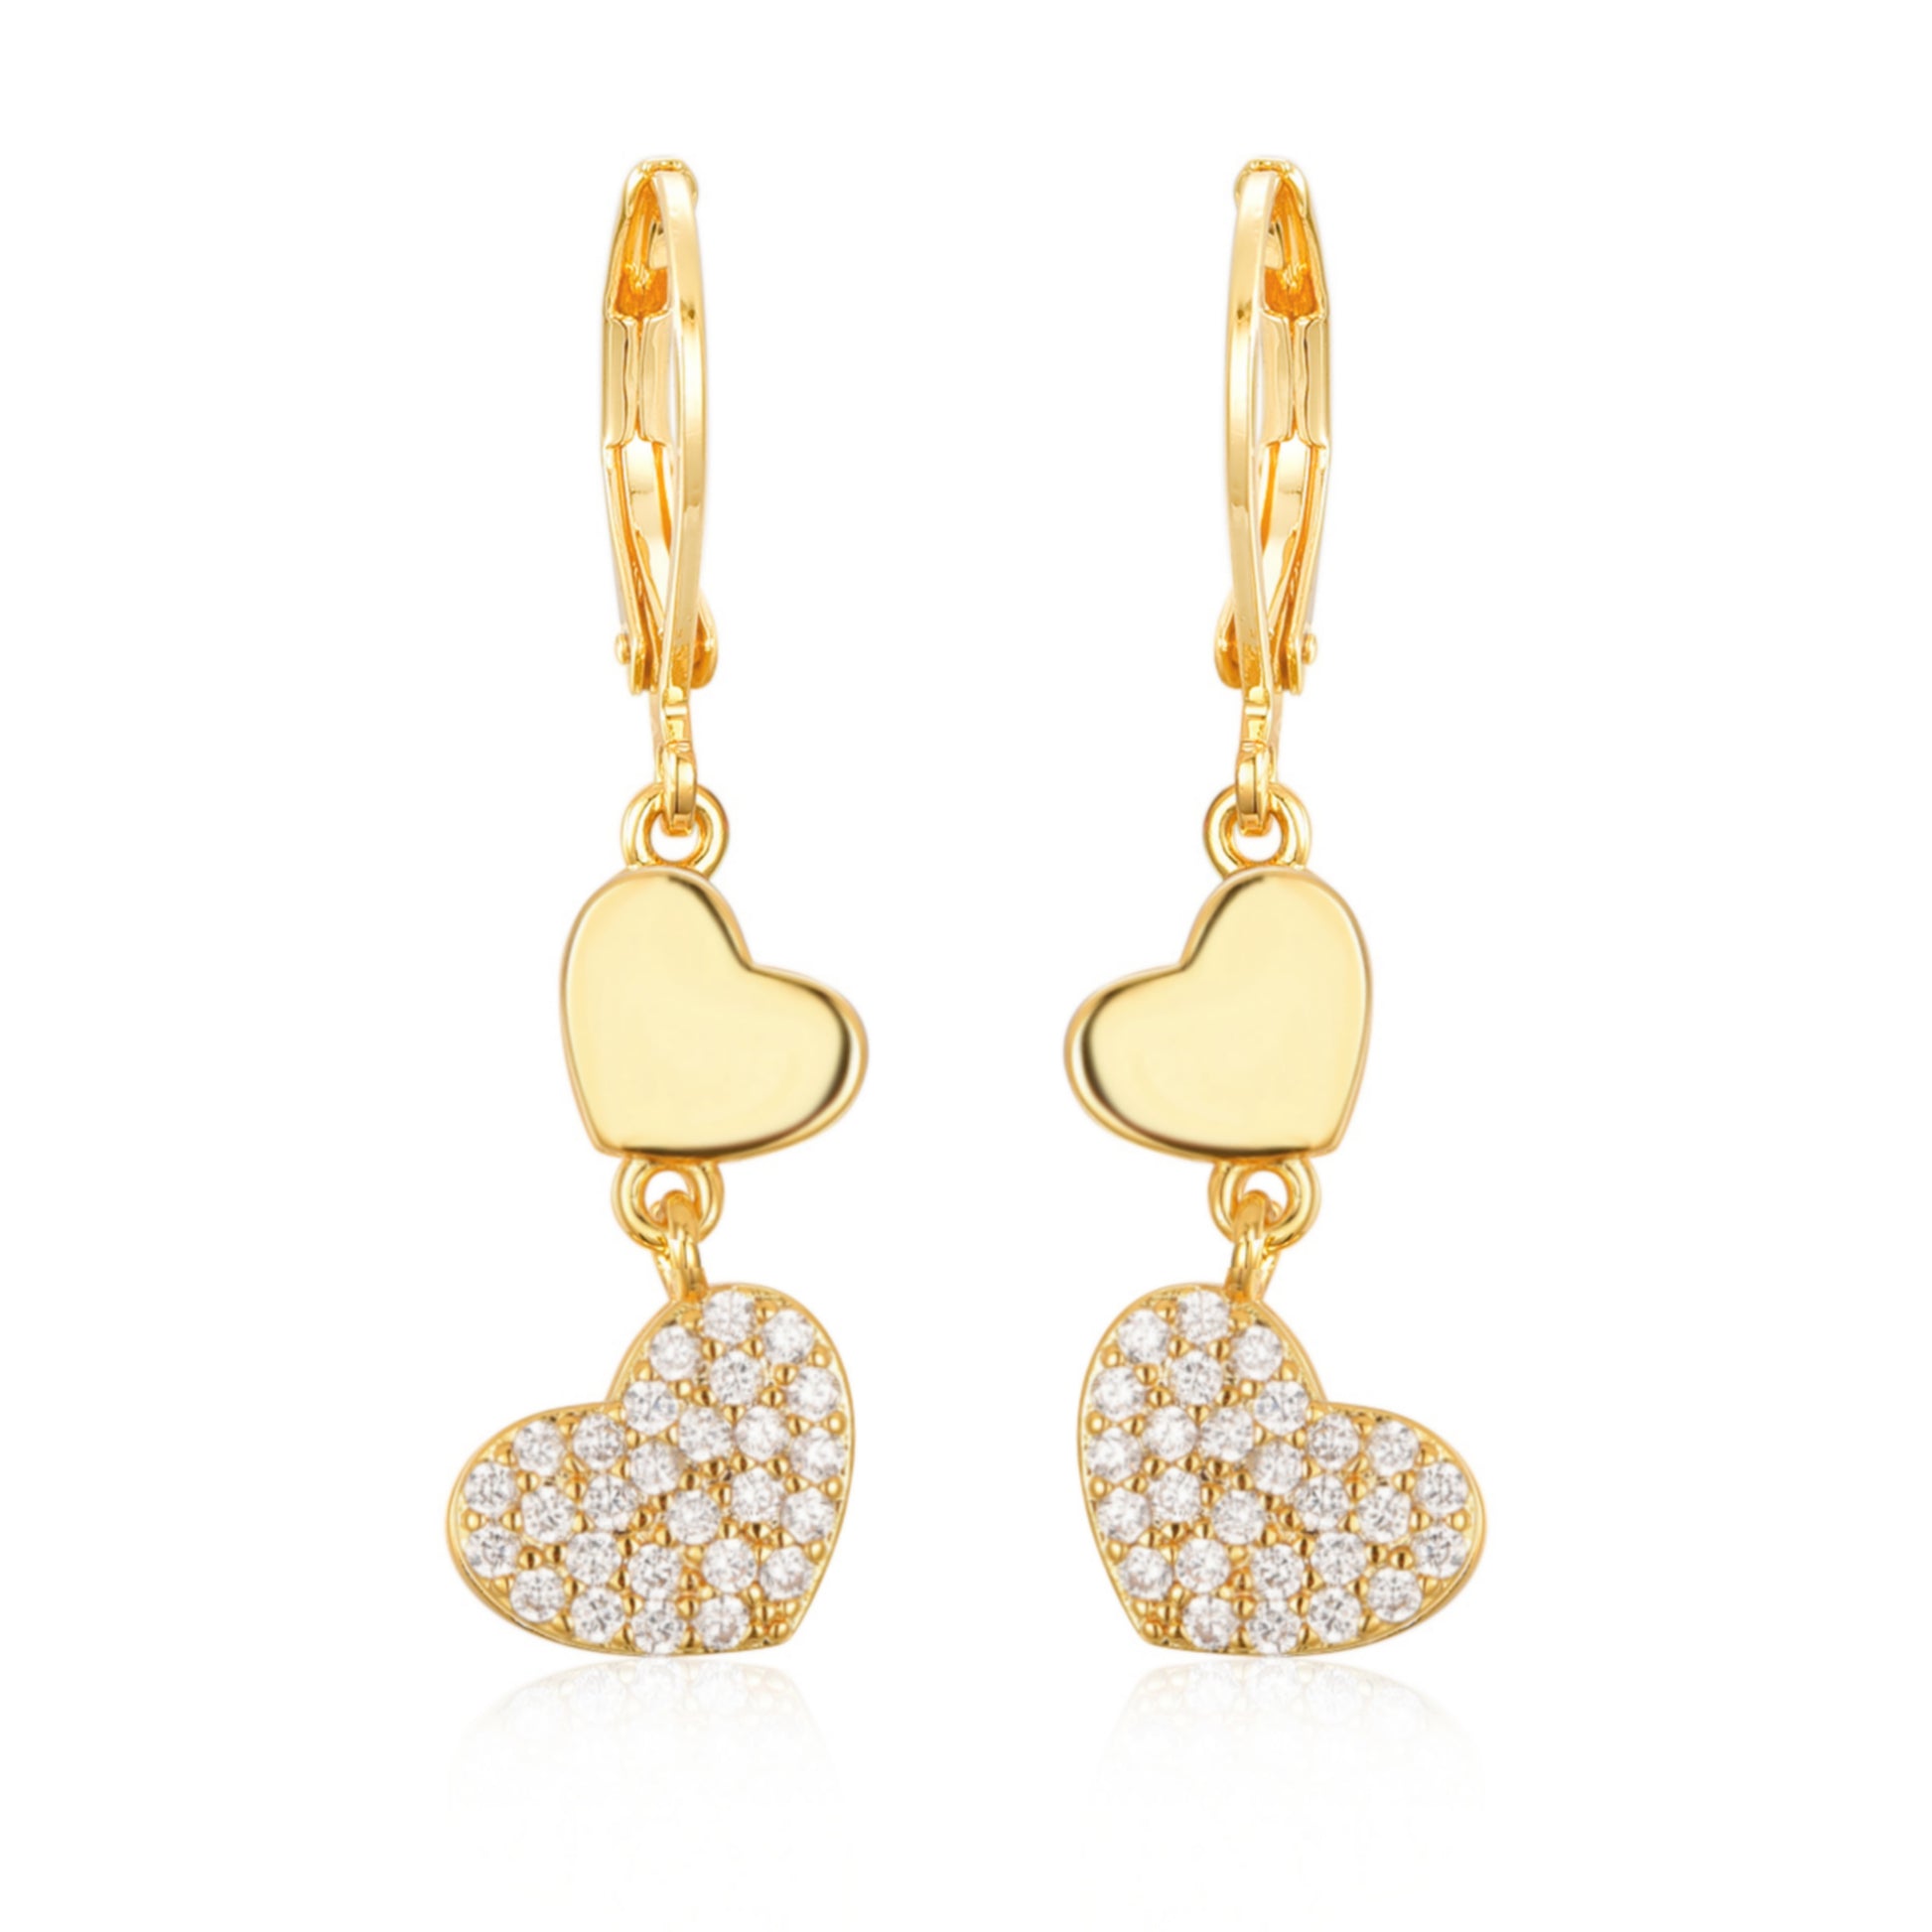 Gold Plated Surgical CZ Double Heart Shape Earrings - HK Jewels